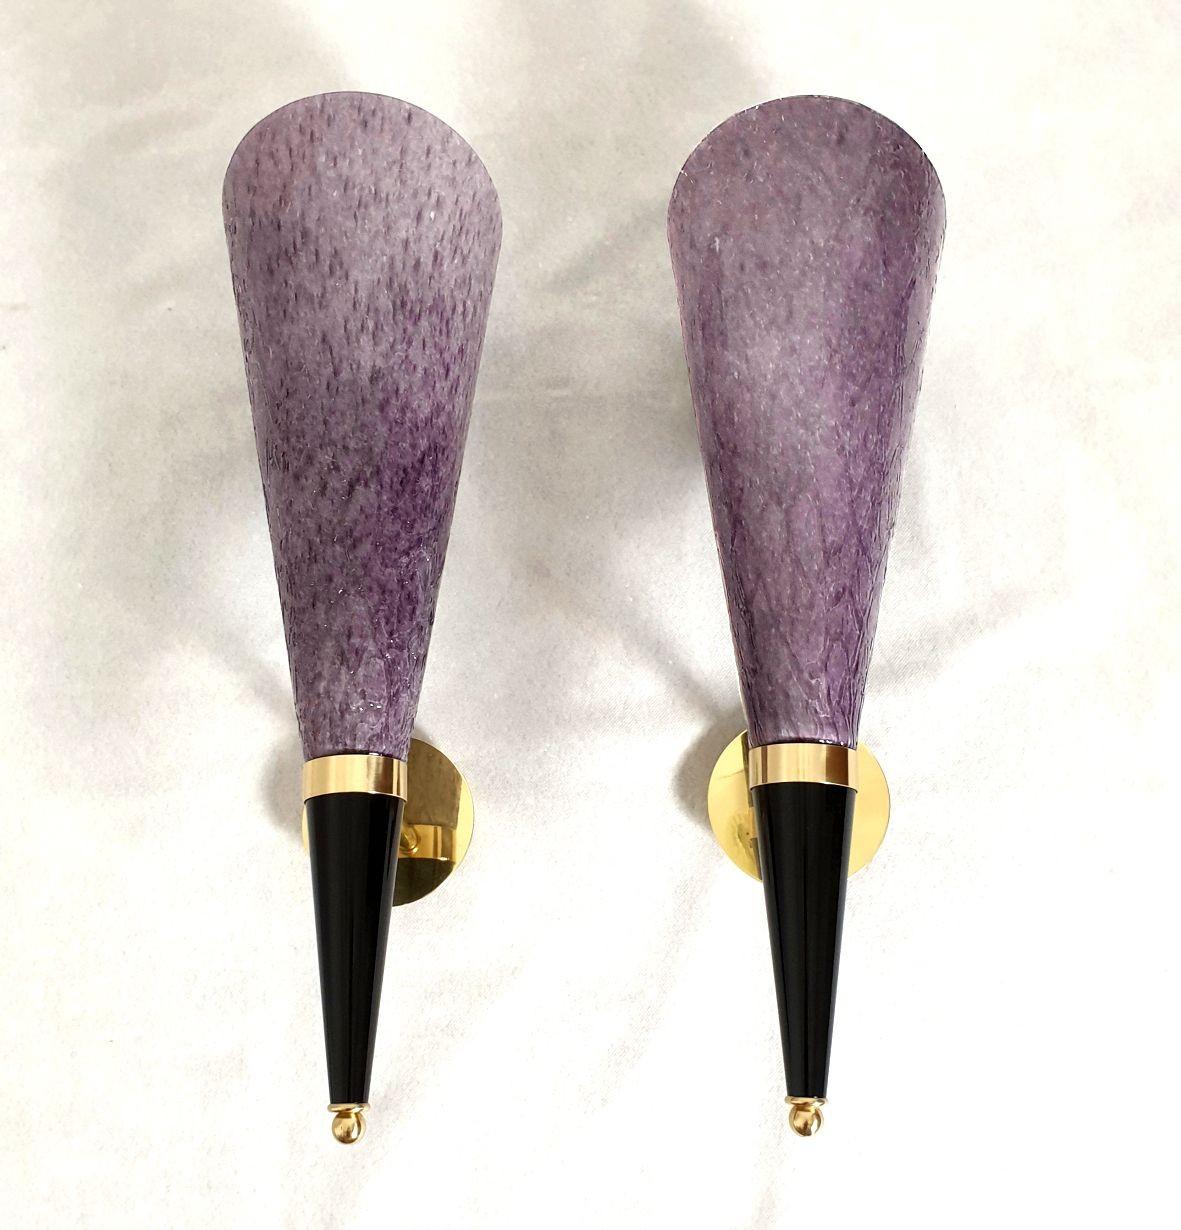 Pair of tall purple Murano glass and brass sconces by Mila Schon, Italy Mid Century Modern. Circa 1970.
The sconces are stamped: Mila Schon, Arte Vetro di Murano, on the glasses.
The sconces are tall, made of a purple textured Murano glass vase,